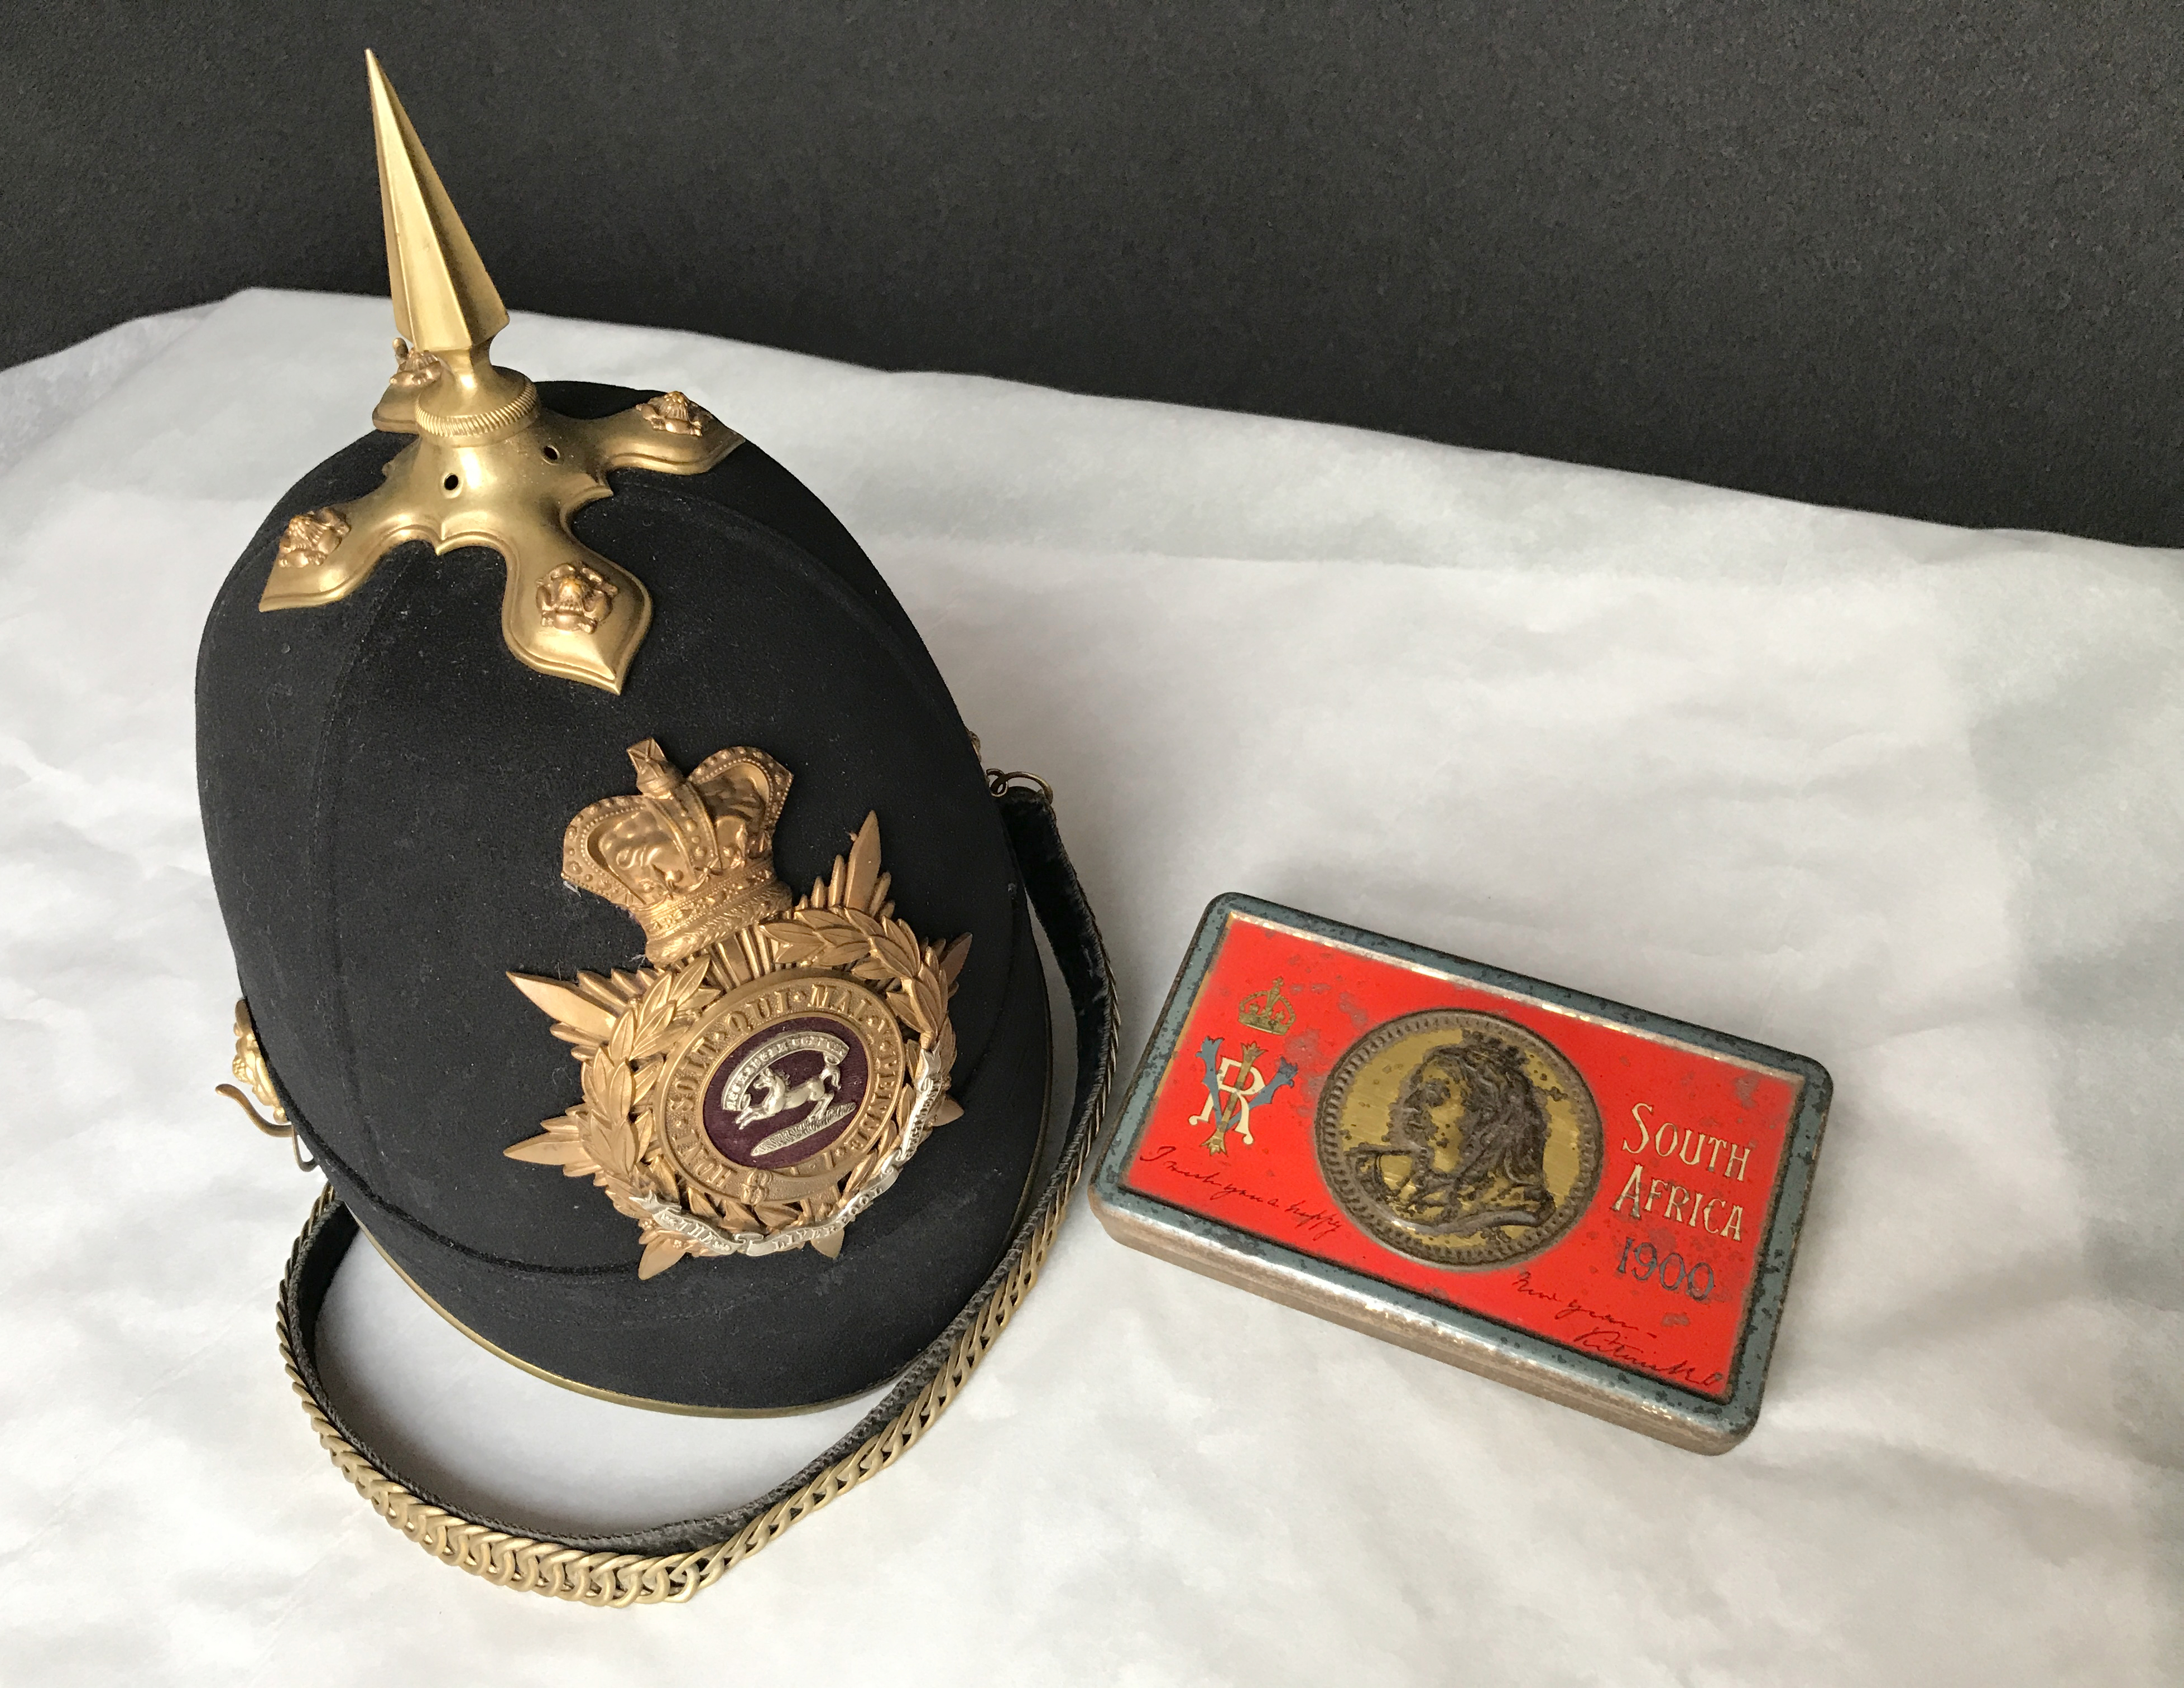 The helmet and the chocolate belonged to the 8th Baronet Sir Henry Edward Paston-Bedingfeld (National Trust/ Victoria McKeown/ PA)